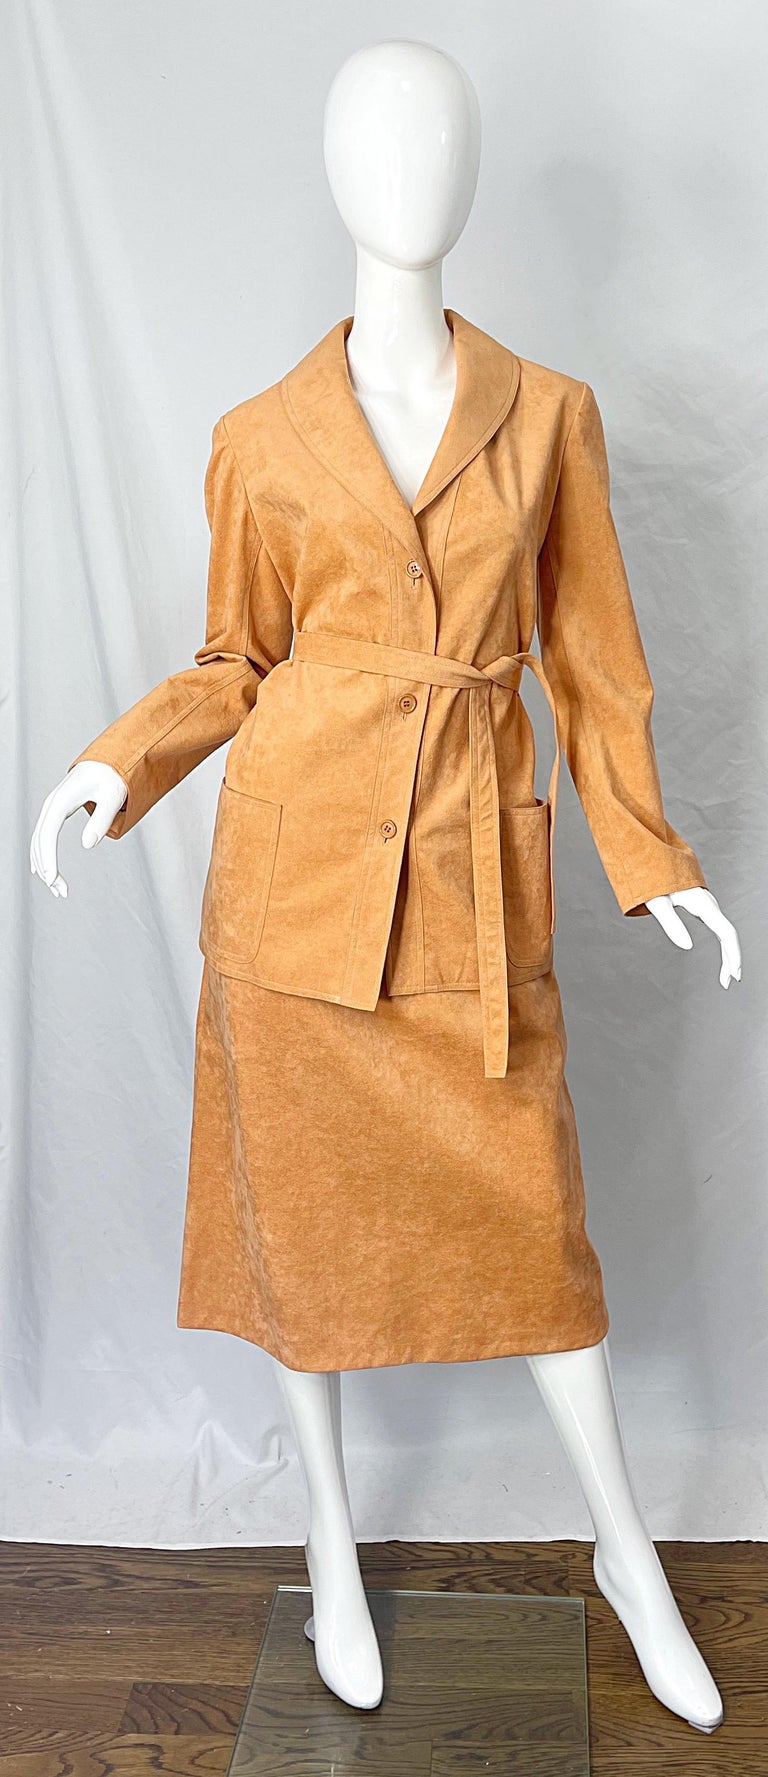 Halston 1970s Salmon Peach Ultrasuede Vintage 70s Belted Jacket and Skirt Suit For Sale 11